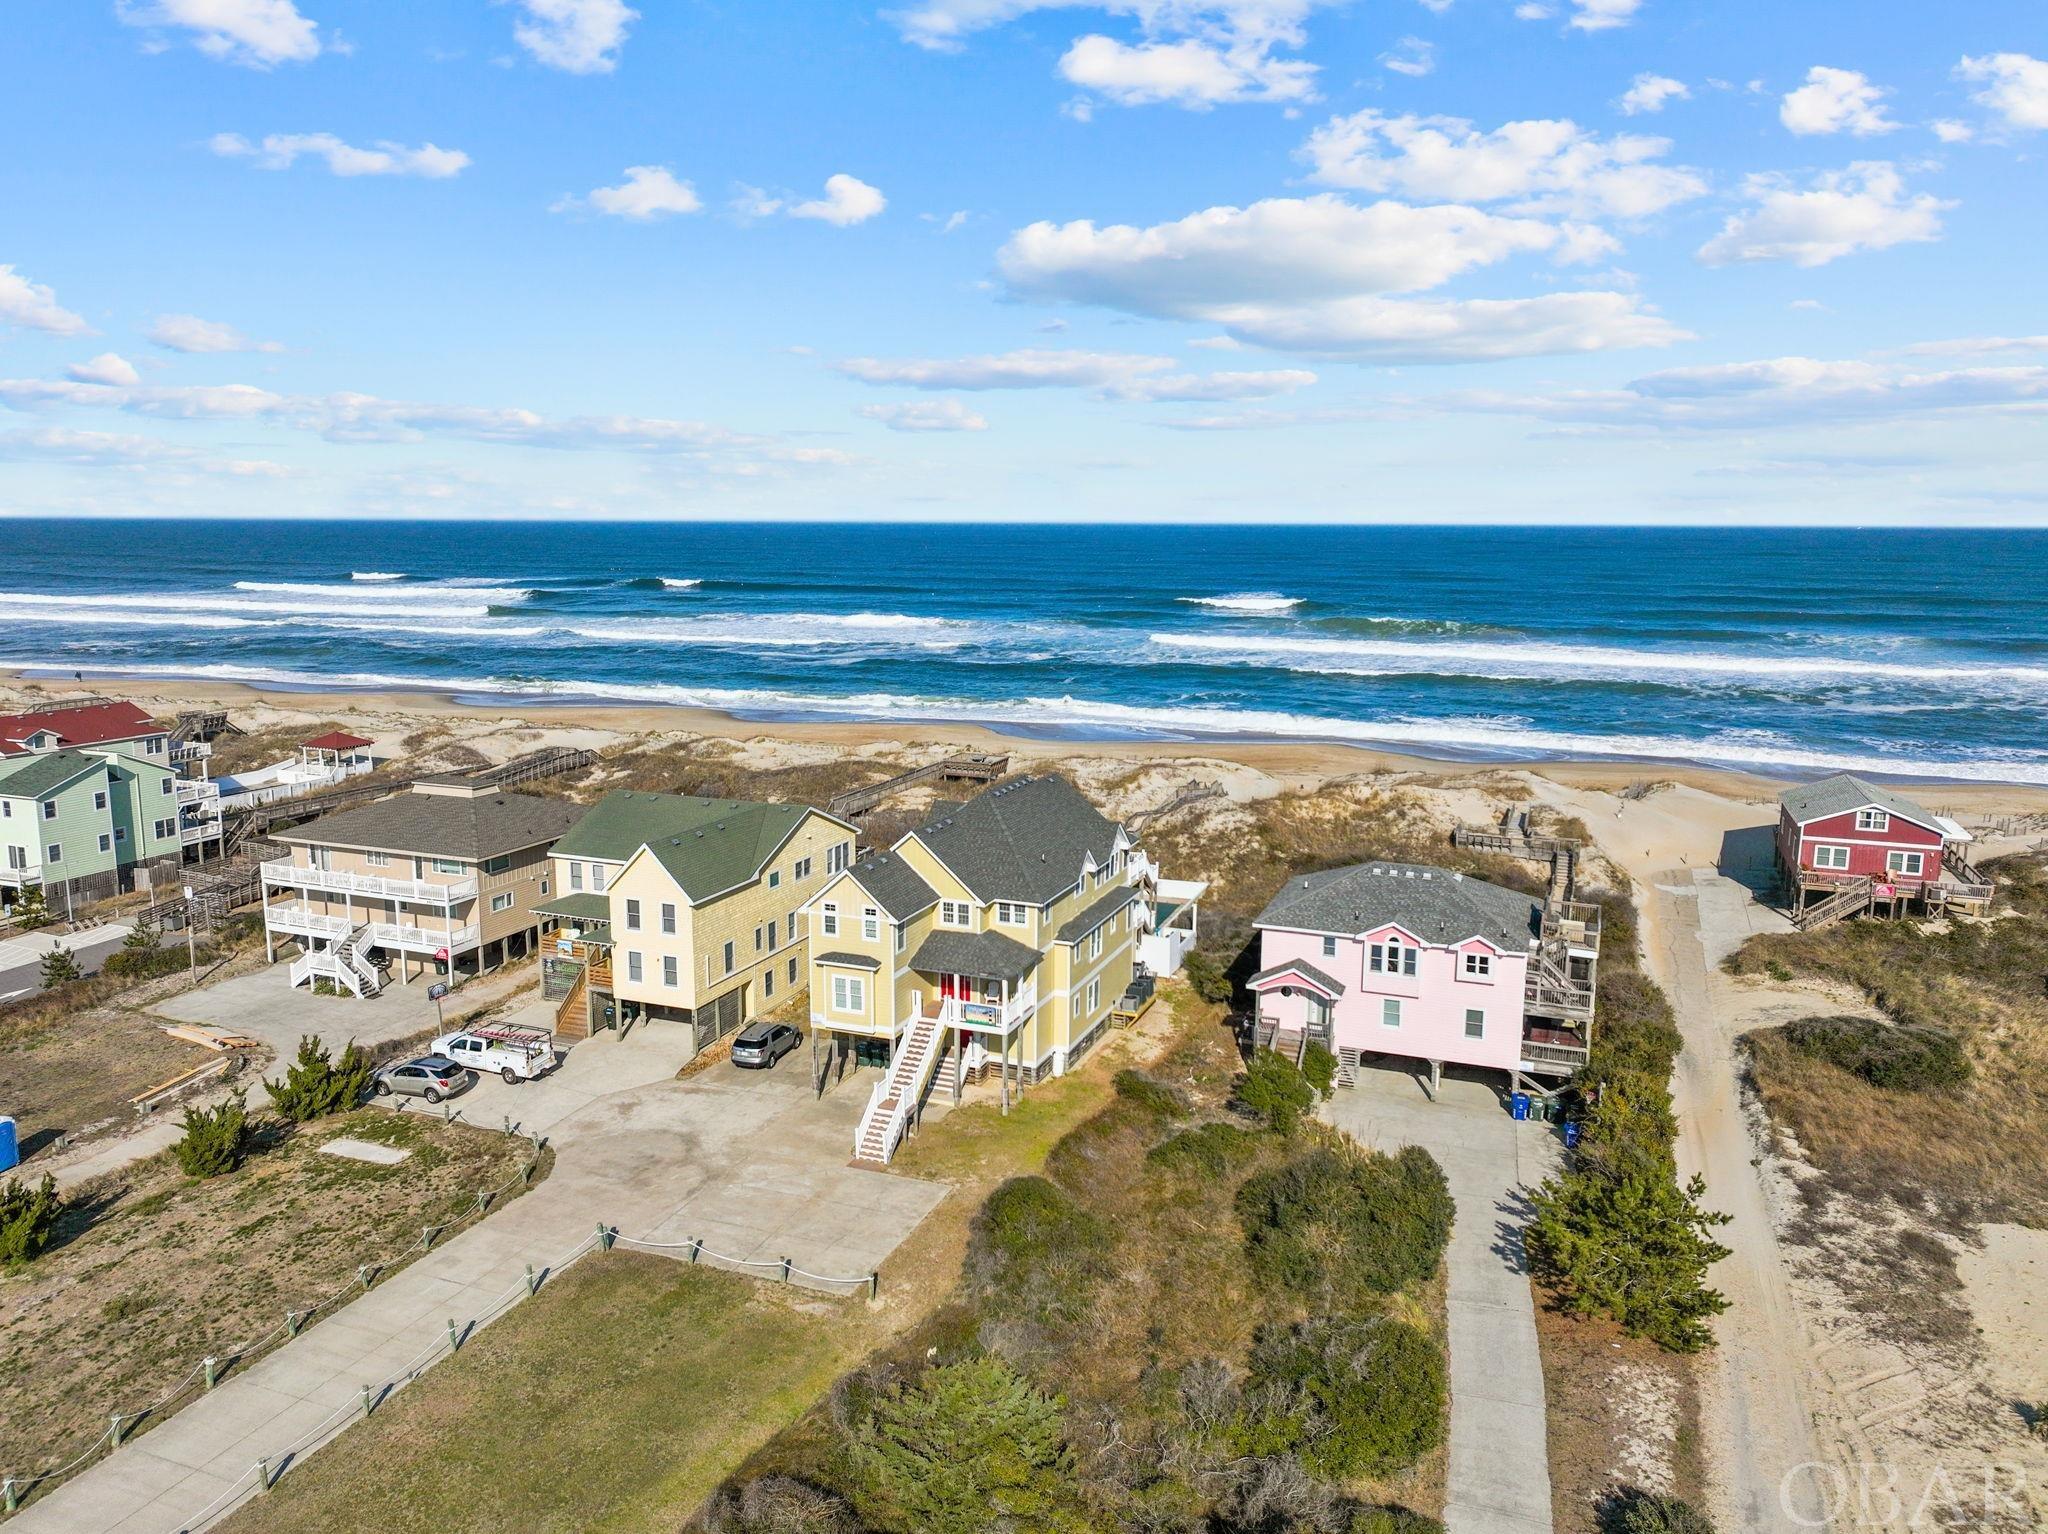 9507 Old Oregon Inlet Road, Nags Head, NC 27959, 8 Bedrooms Bedrooms, ,9 BathroomsBathrooms,Residential,For sale,Old Oregon Inlet Road,124824